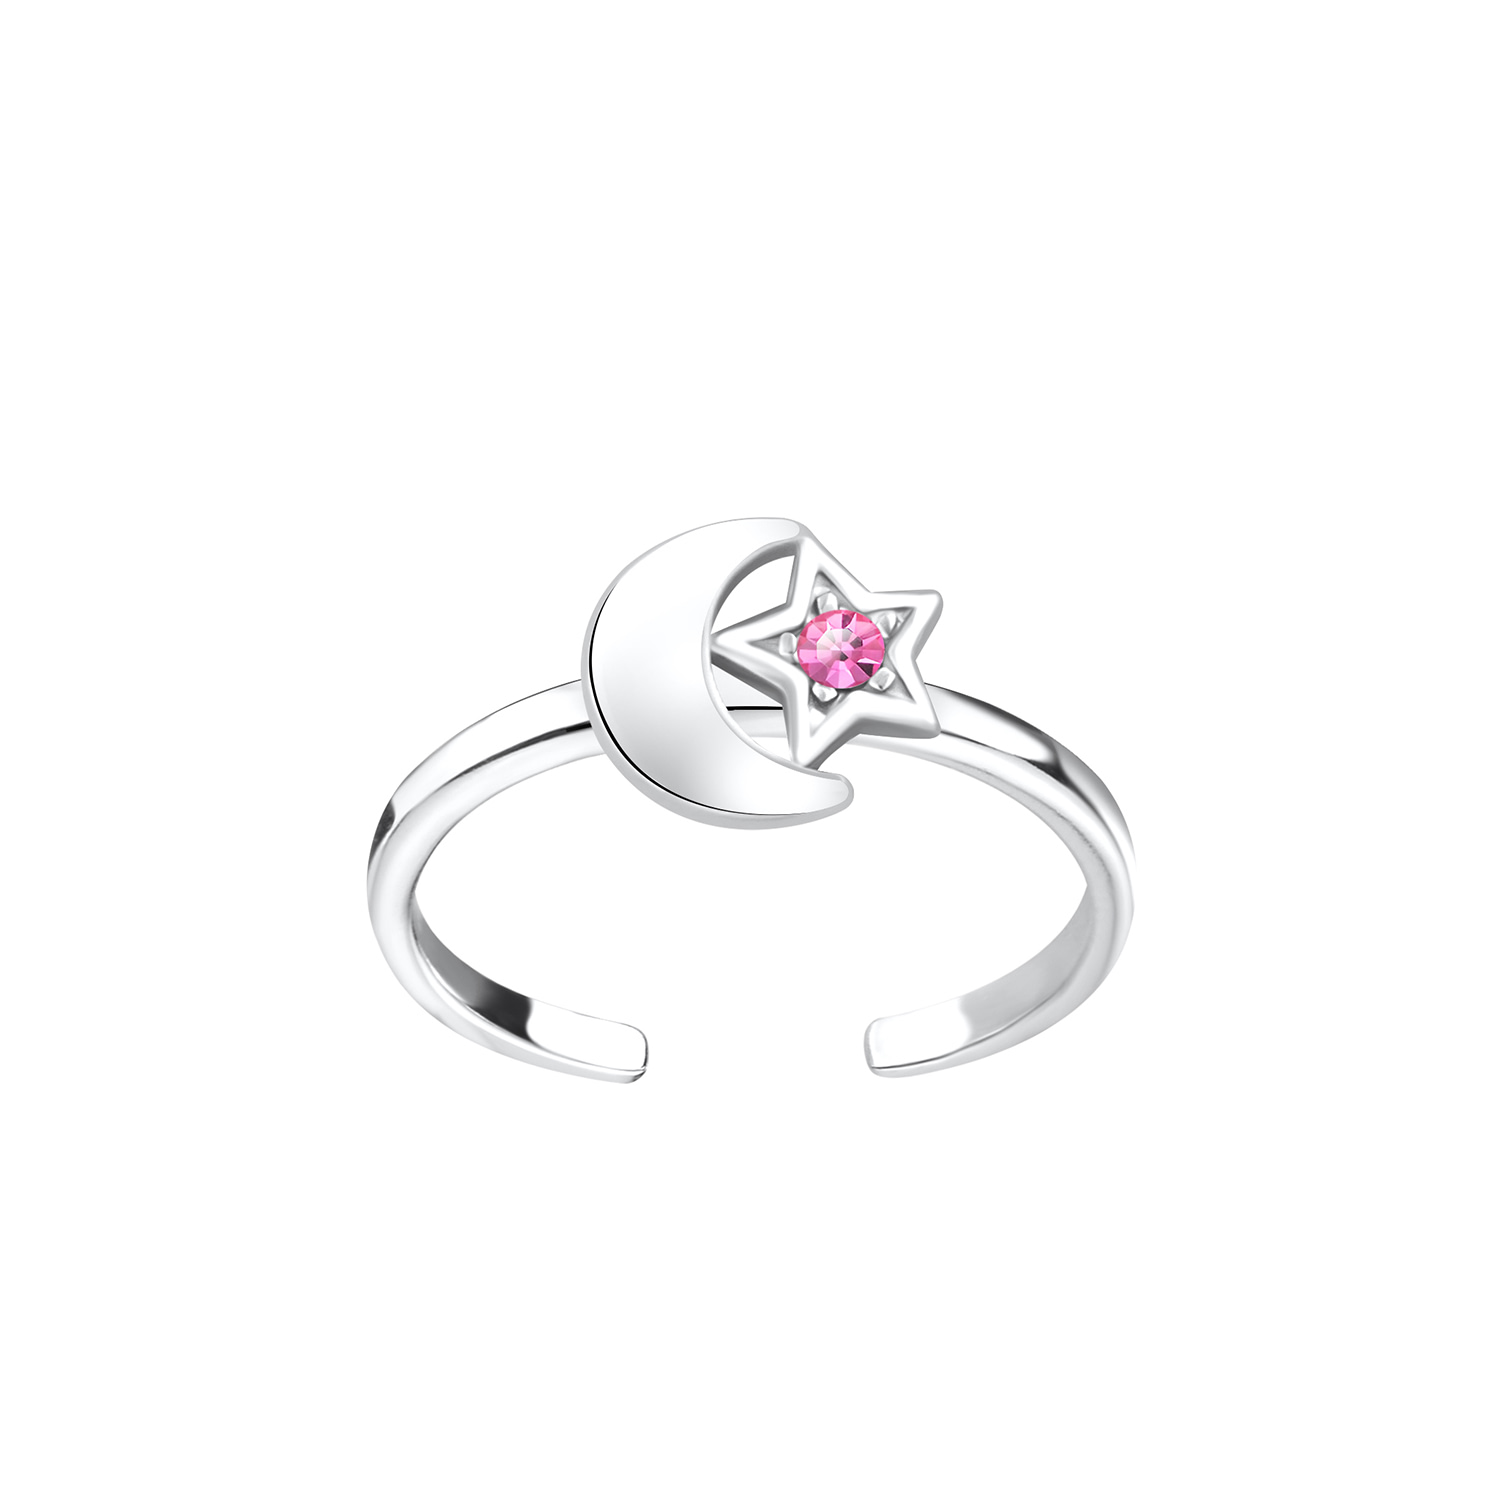 Roses Toe Ring Band 925 Sterling Silver Choose Color